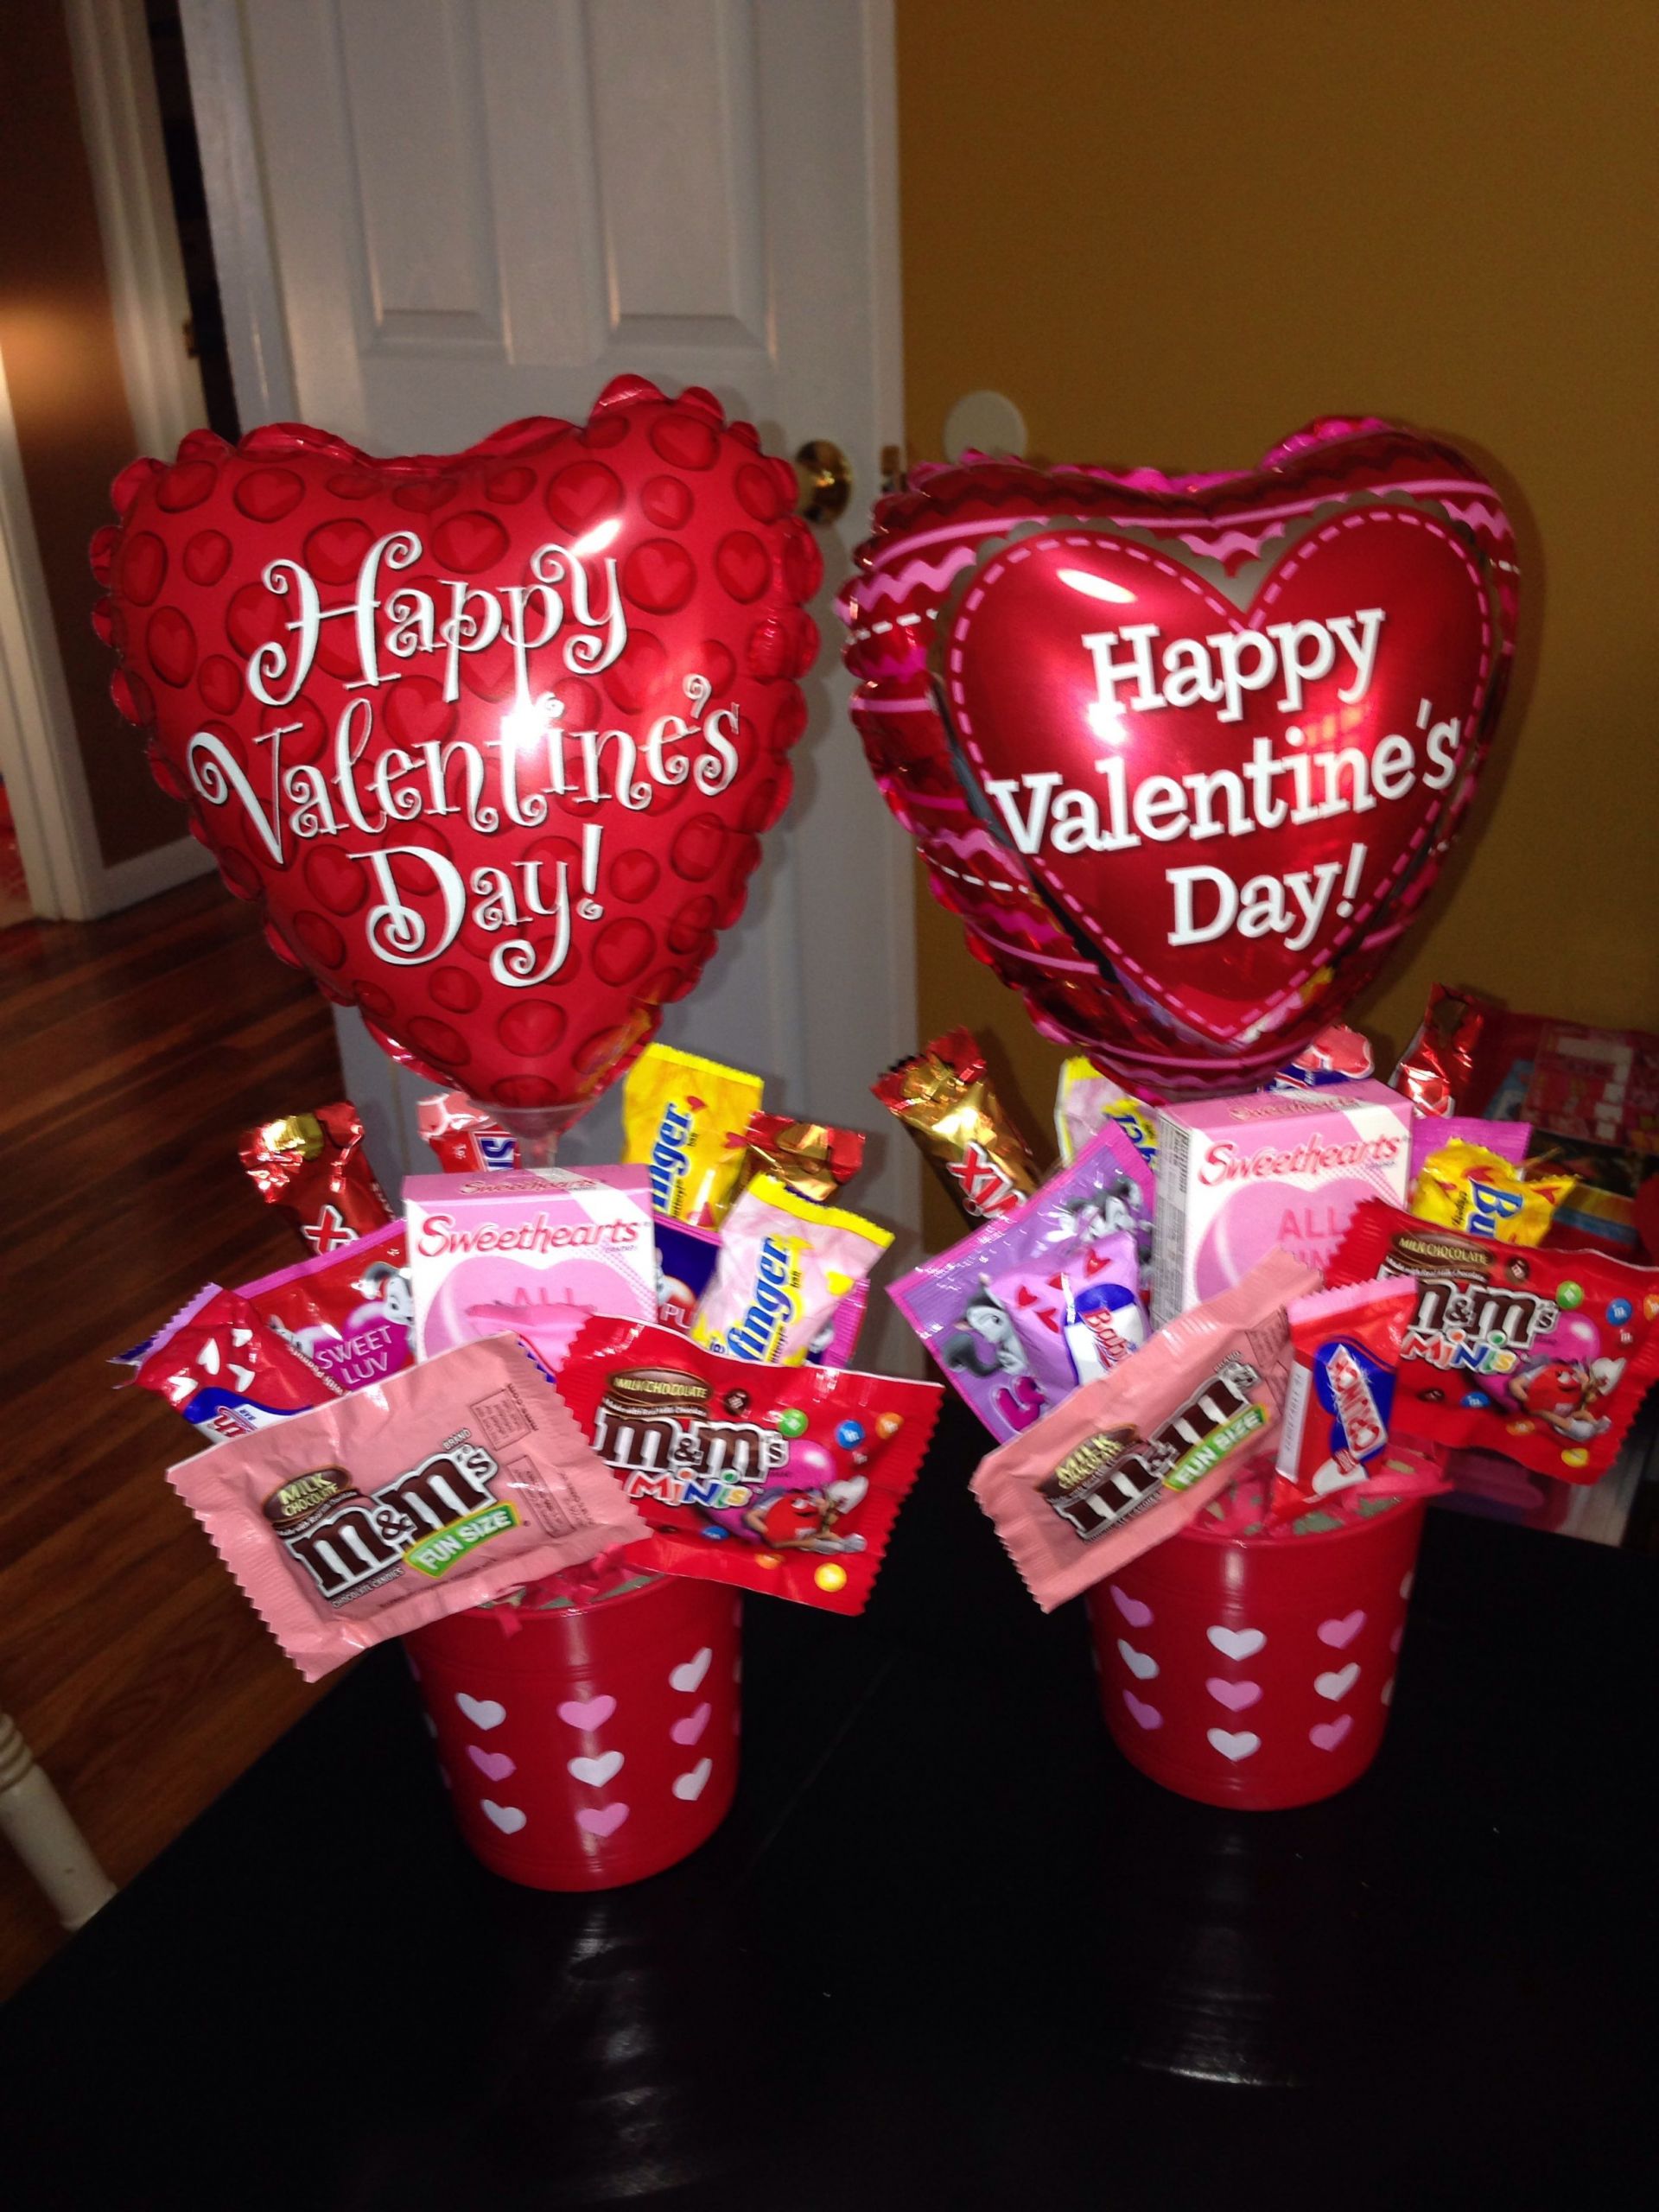 Inexpensive Valentines Gift Ideas
 Small valentines bouquets